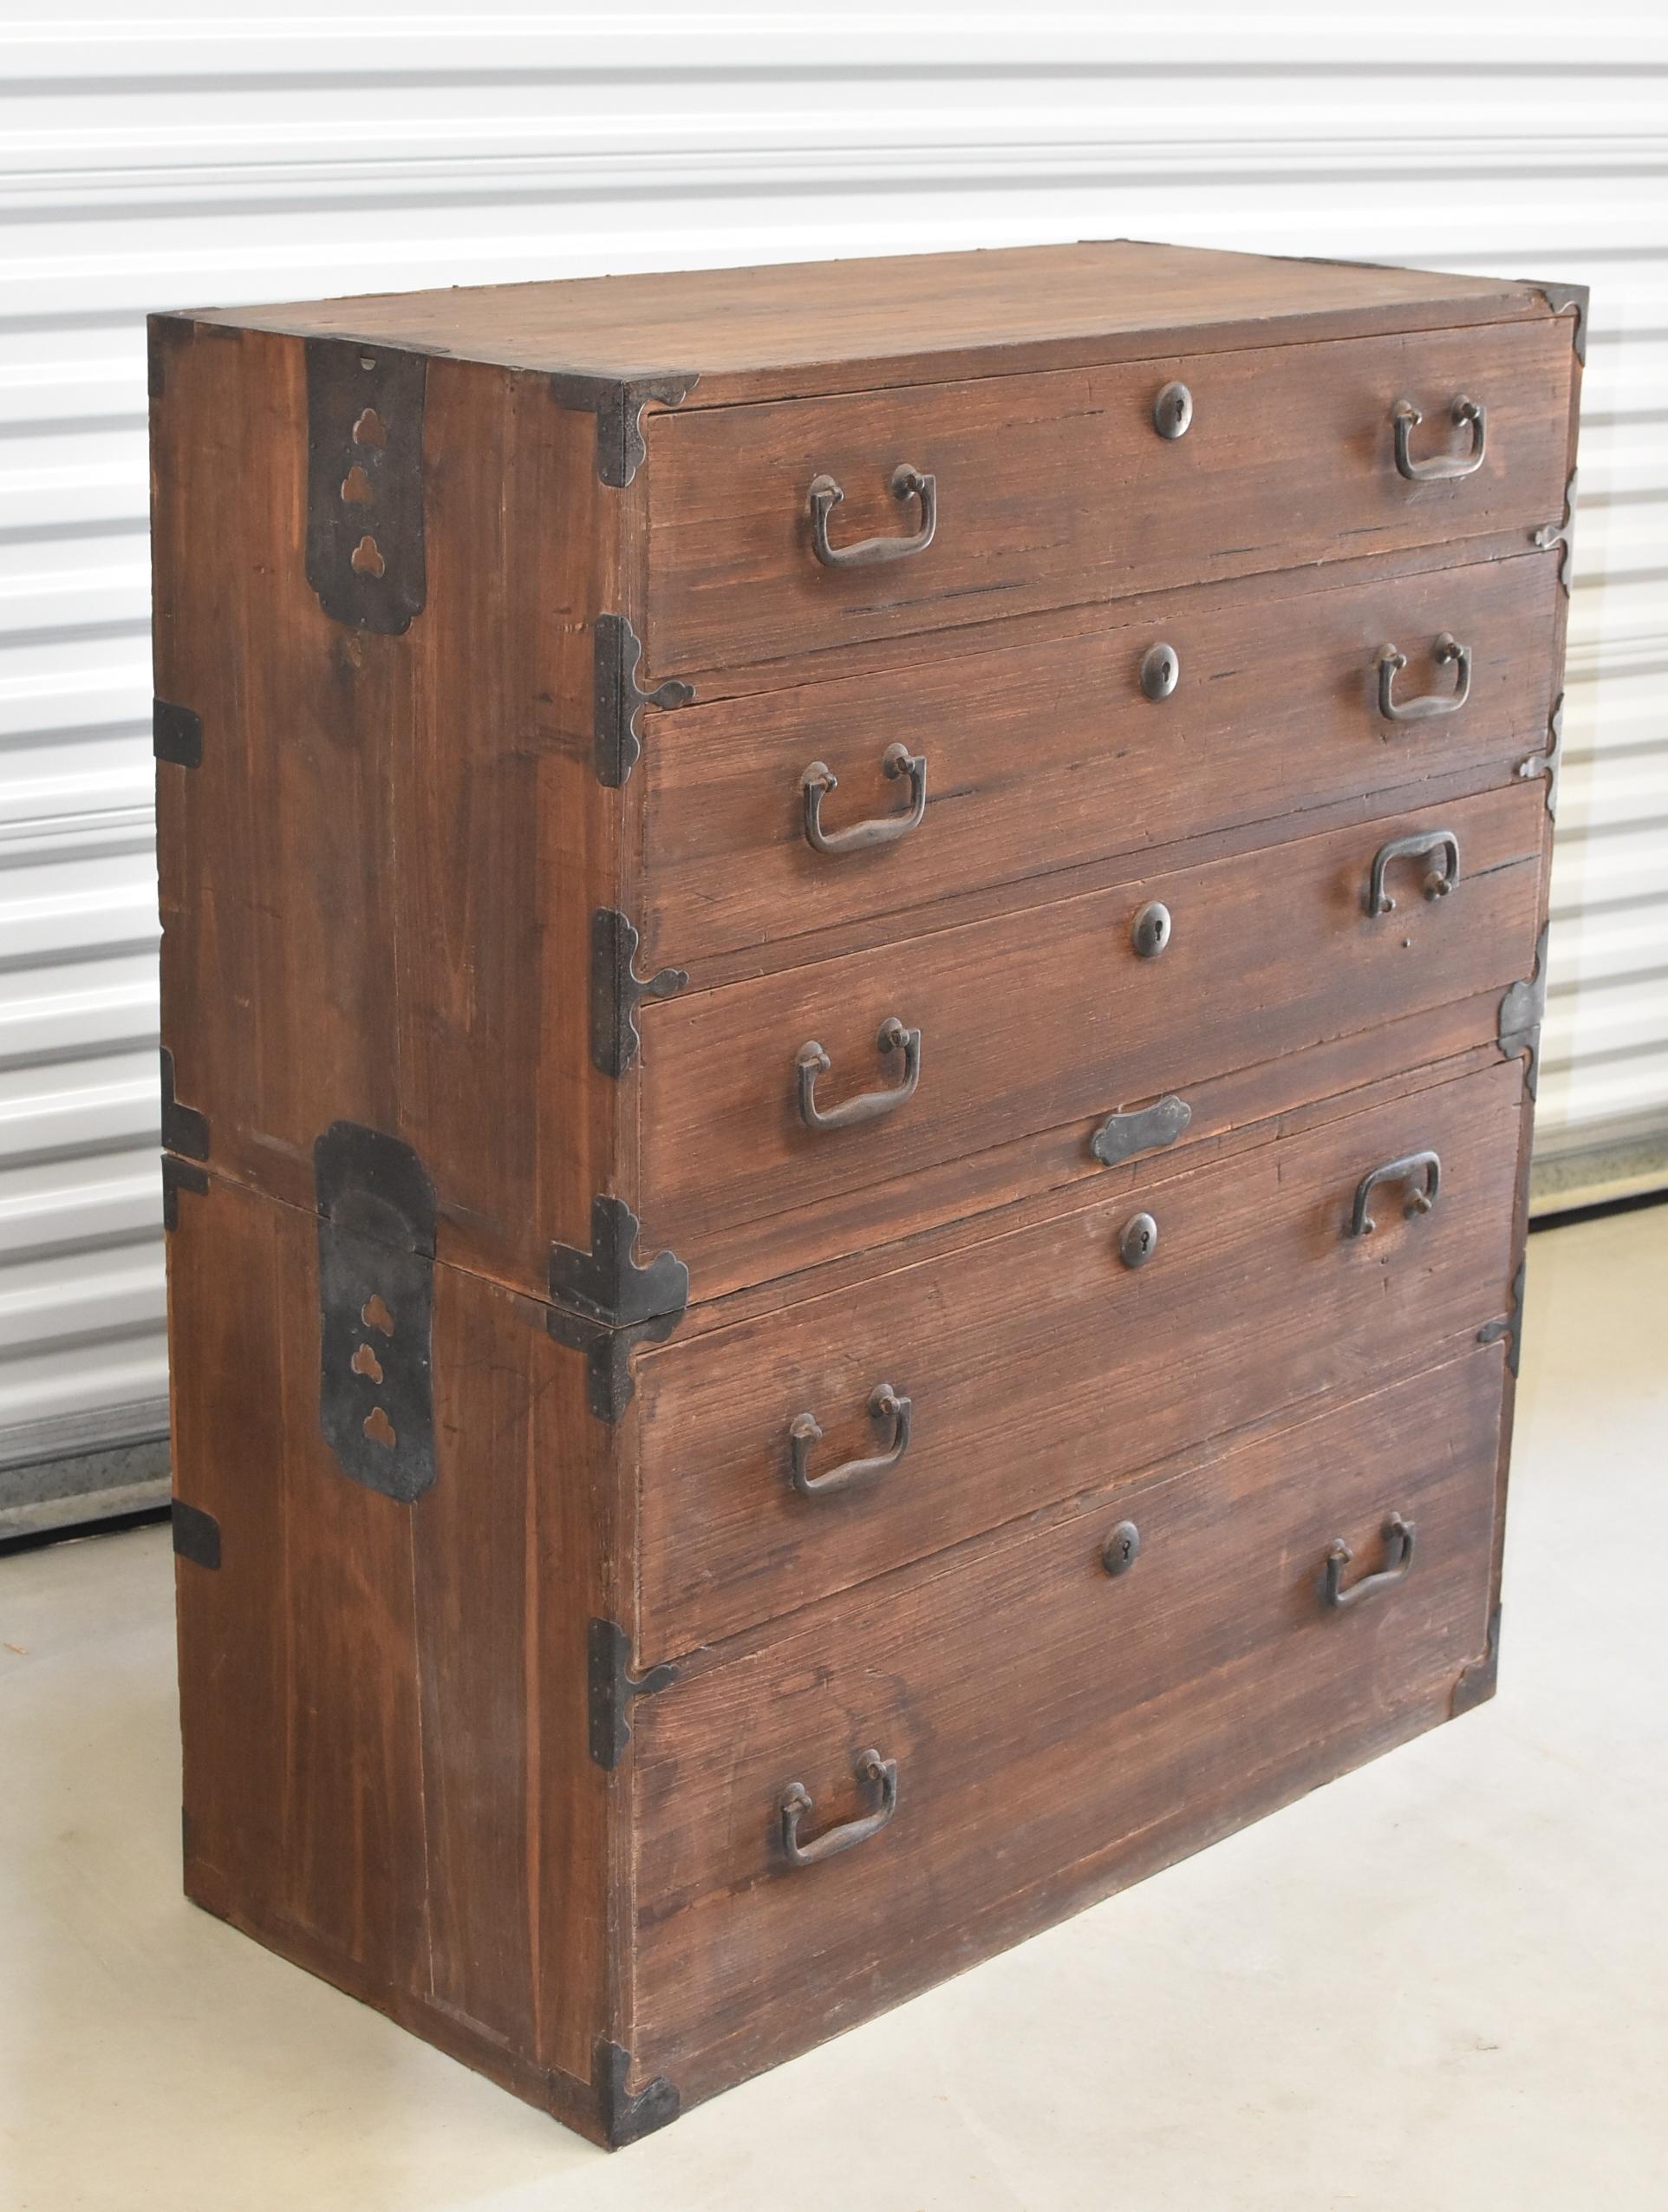 A beautiful vintage Japanese Tansu with five full capacity drawers. The chest consists of two chests of the same size, which makes this piece a very versatile piece of furniture. Stacked they make a nice tall chest. Separated they make great night